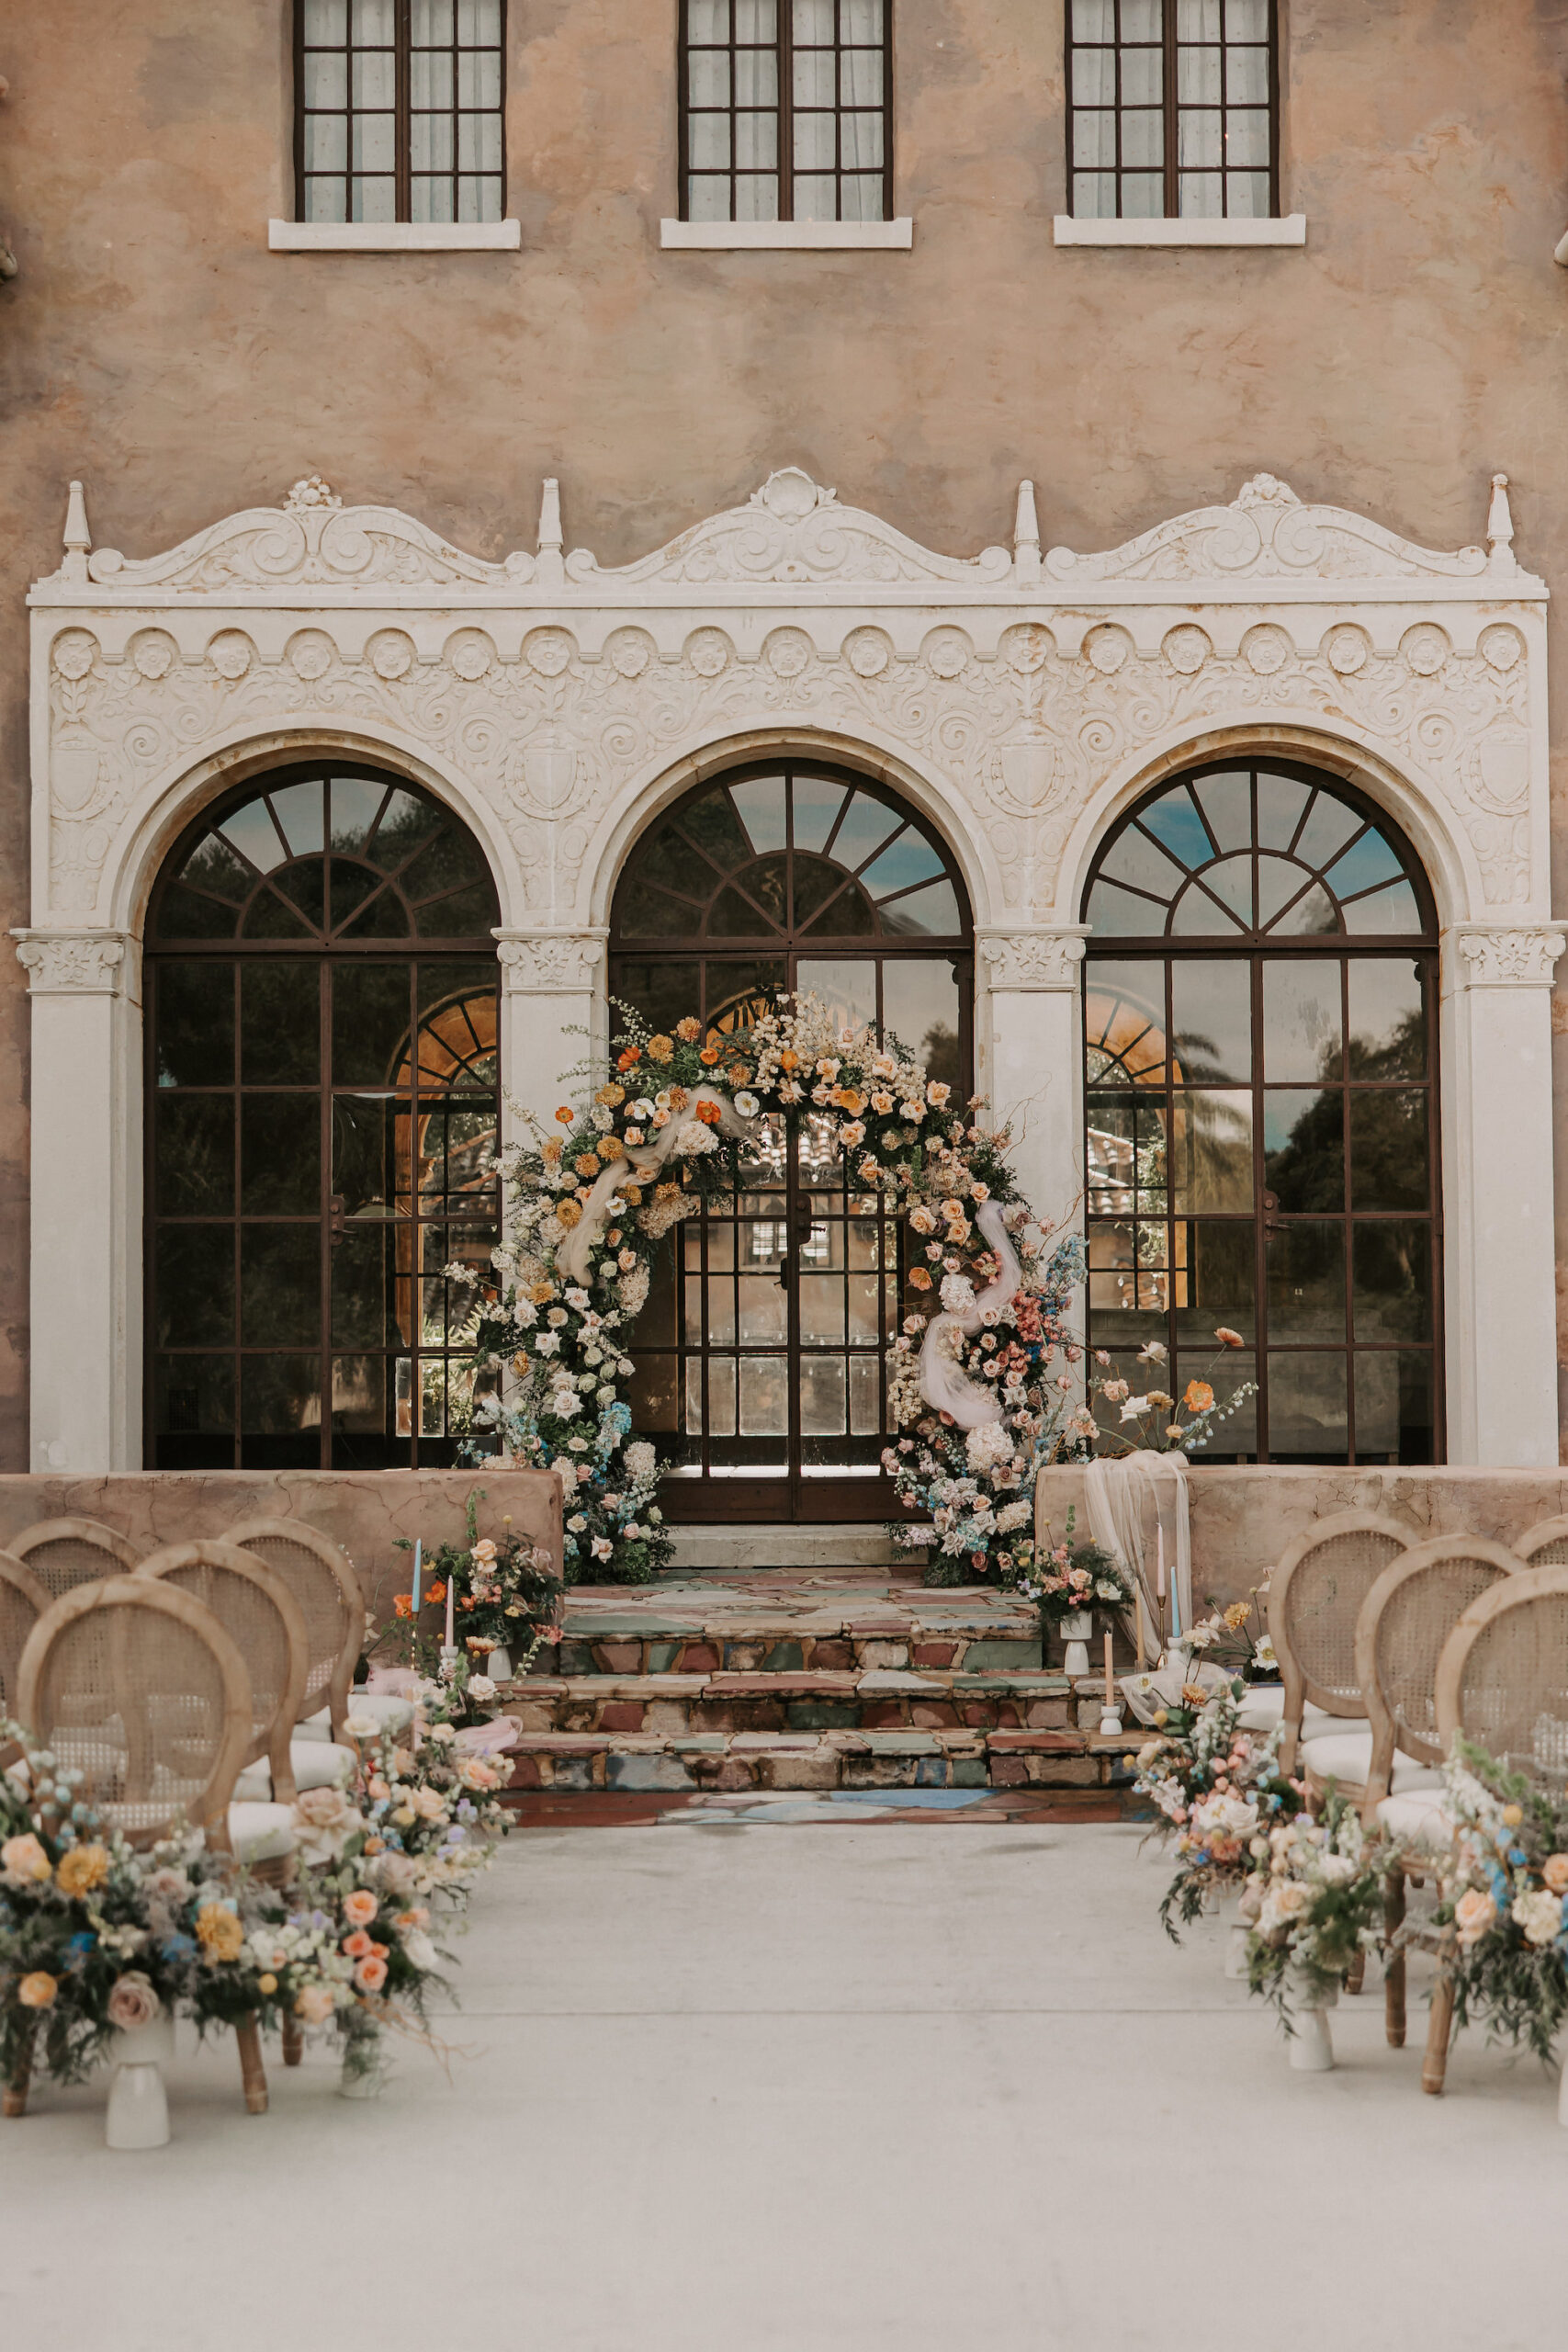 Garden Ombre Rainbow Floral Ceremony Arch for Italian Mansion Style Wedding Ceremony | Decor Inspiration